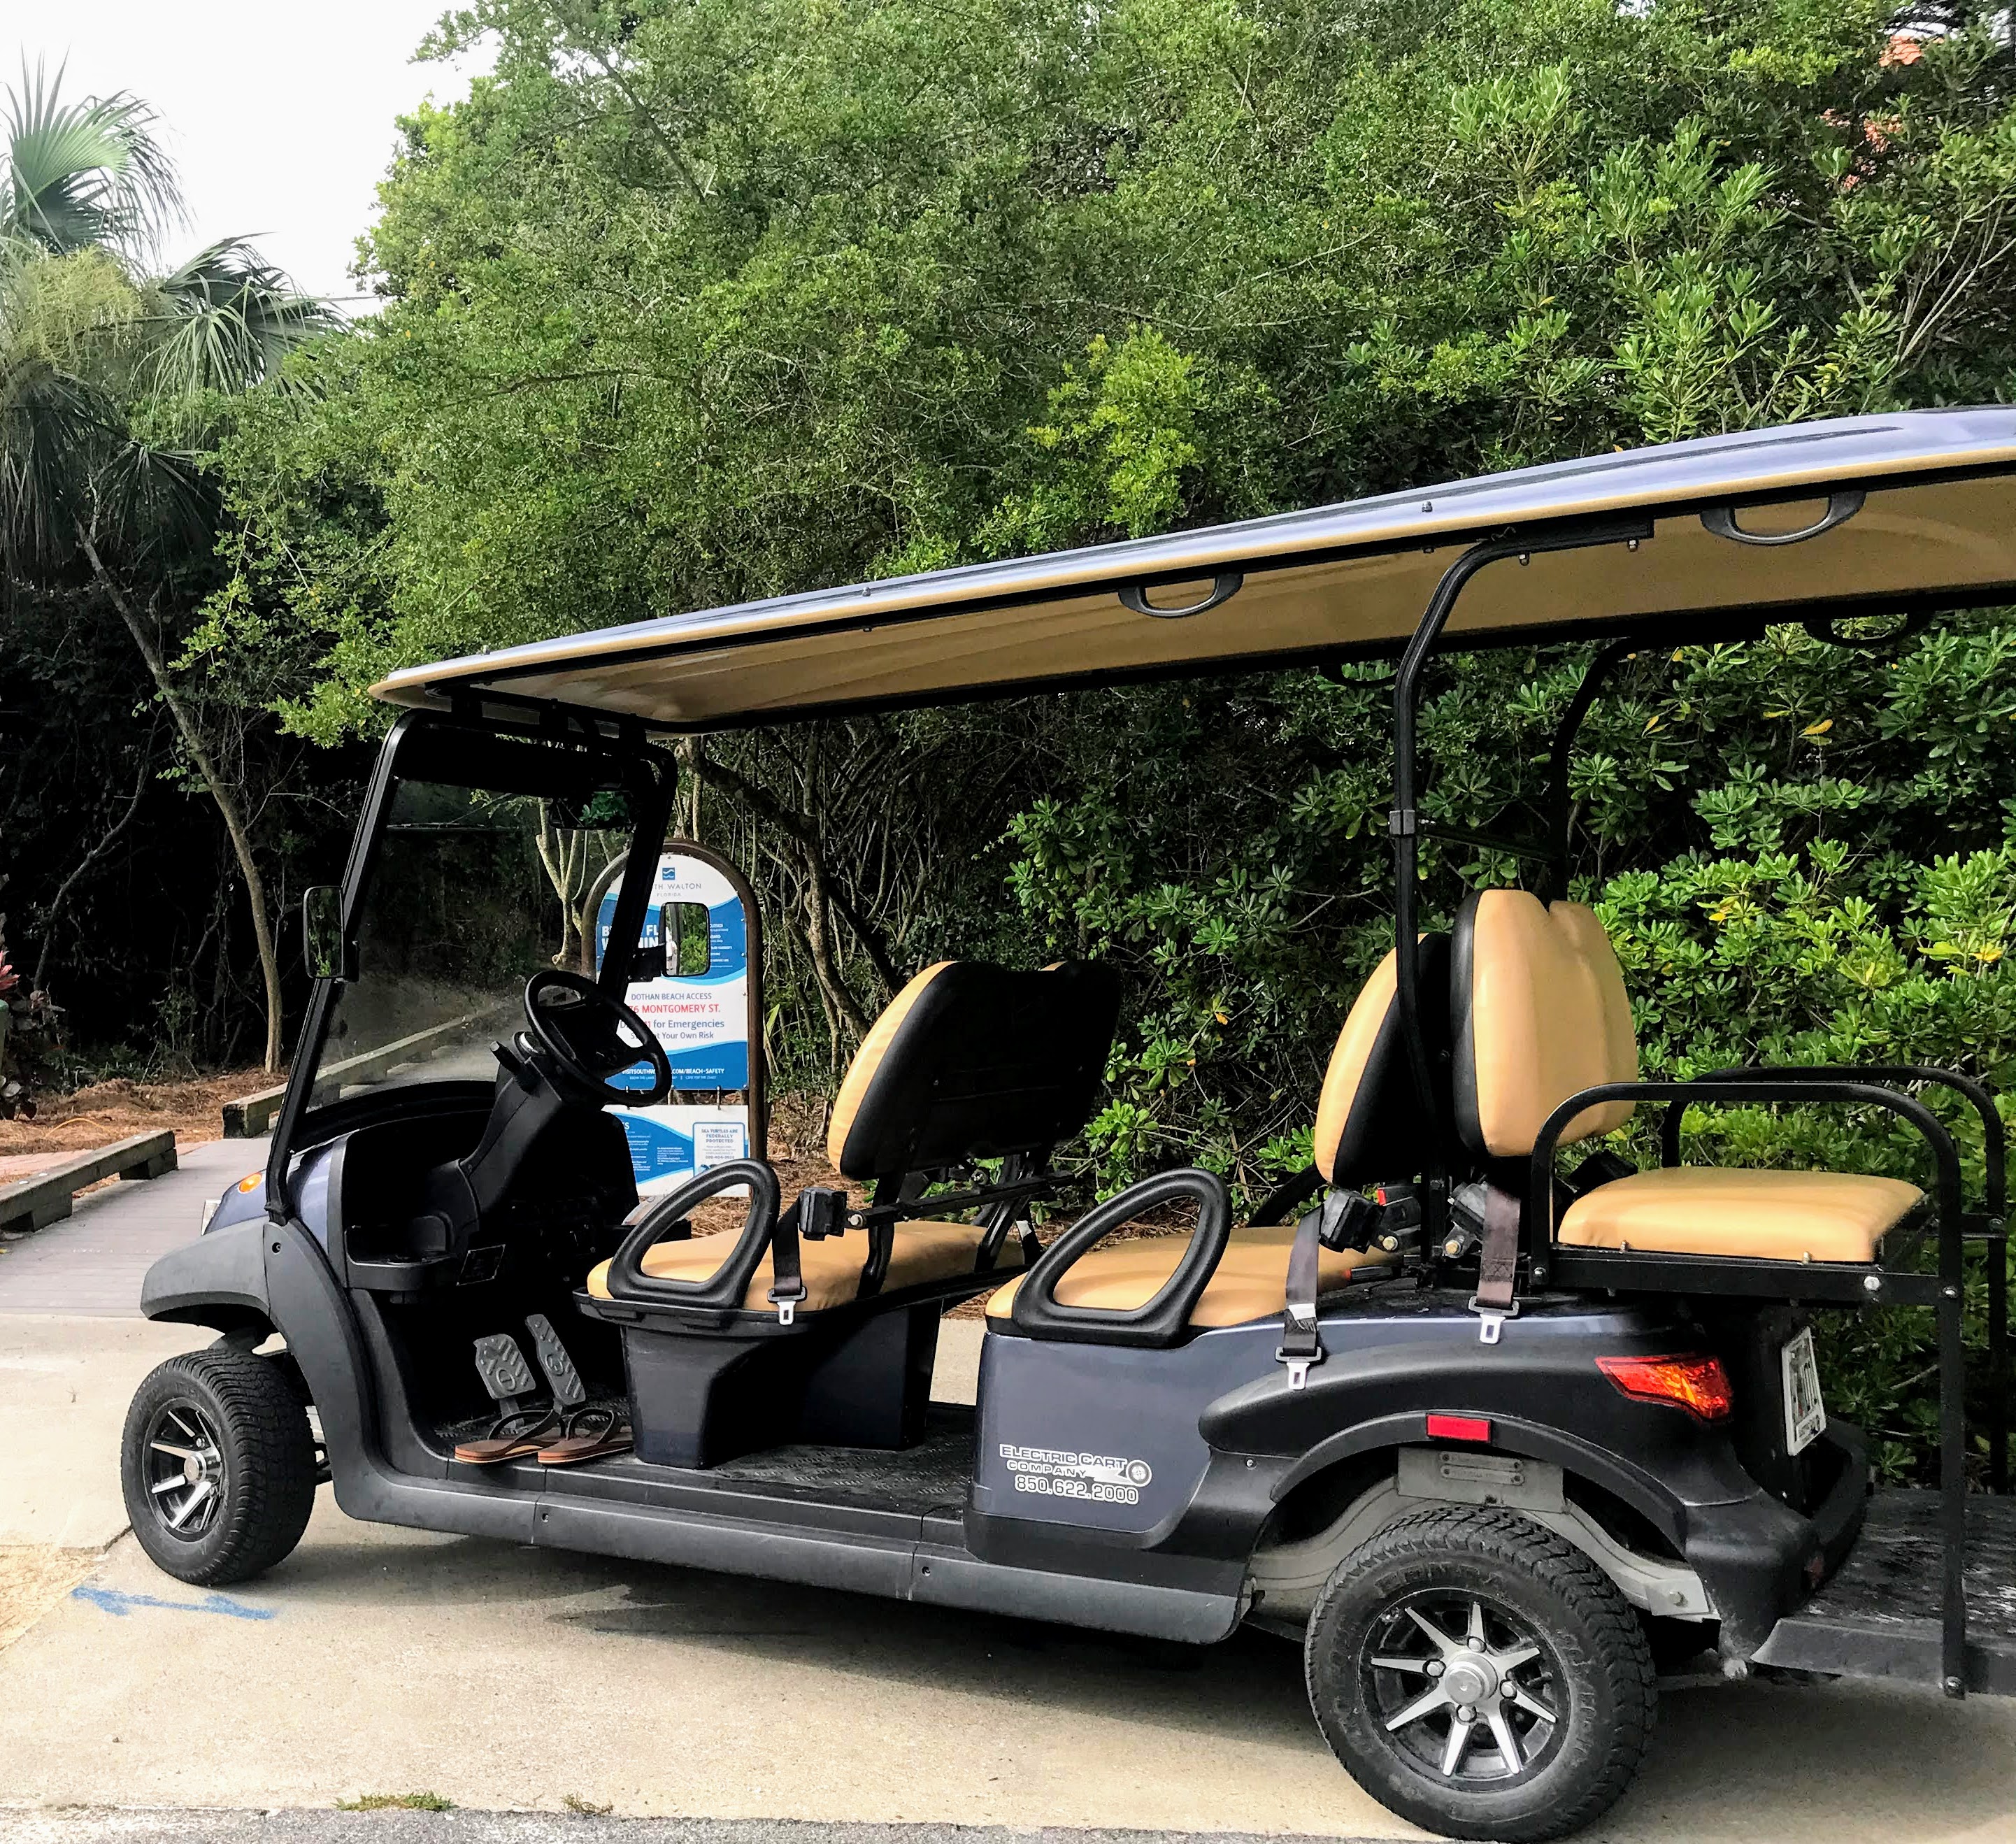 Street Legal Golf Carts - A New Way to Get Around Town